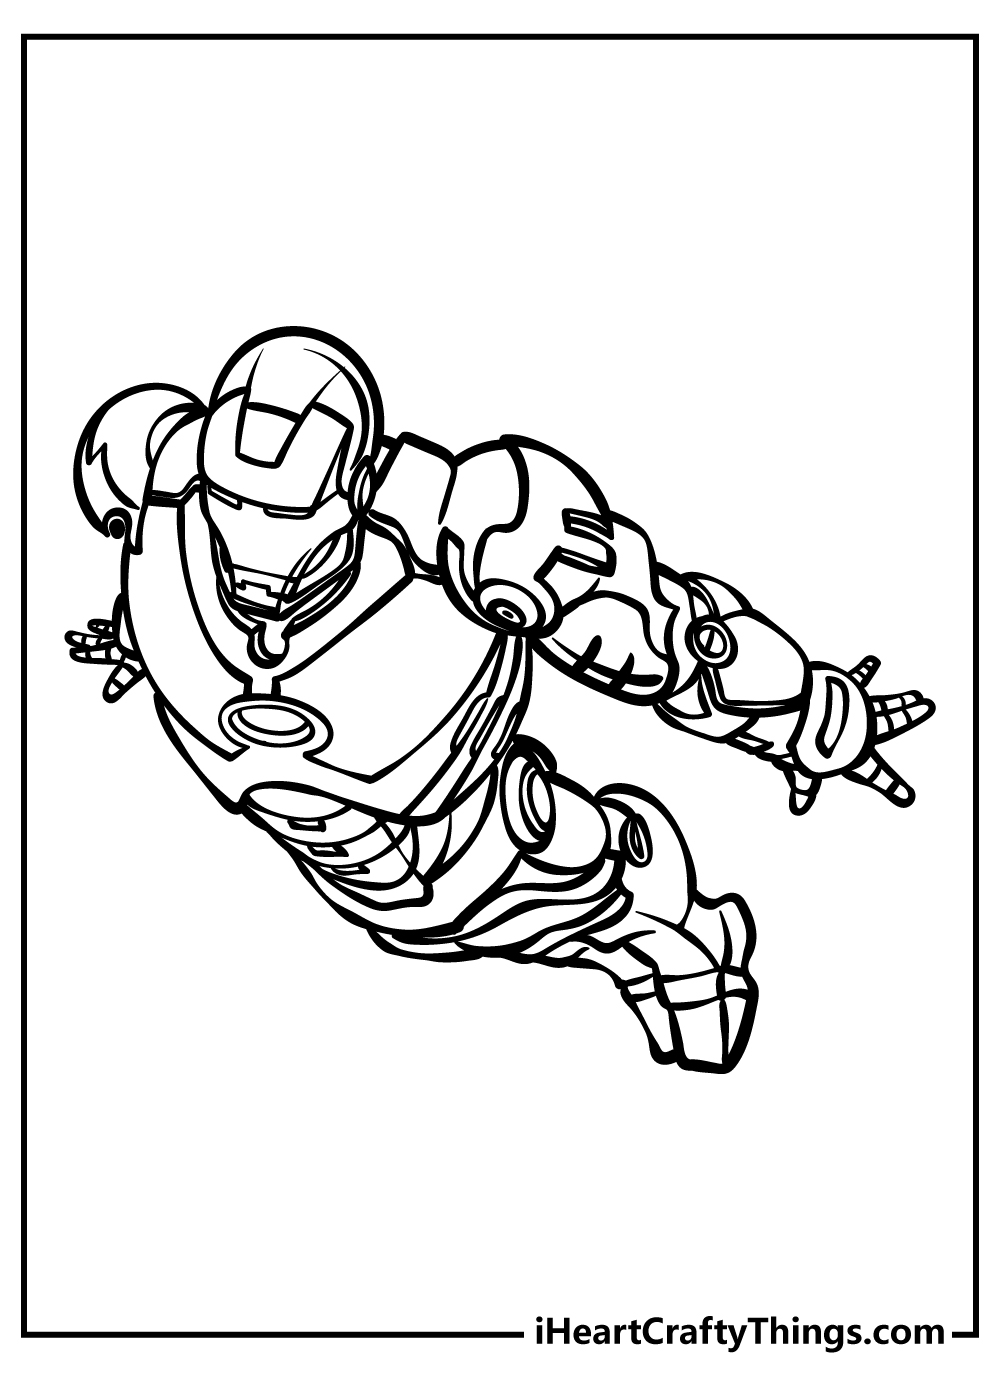 iron man flying coloring pages